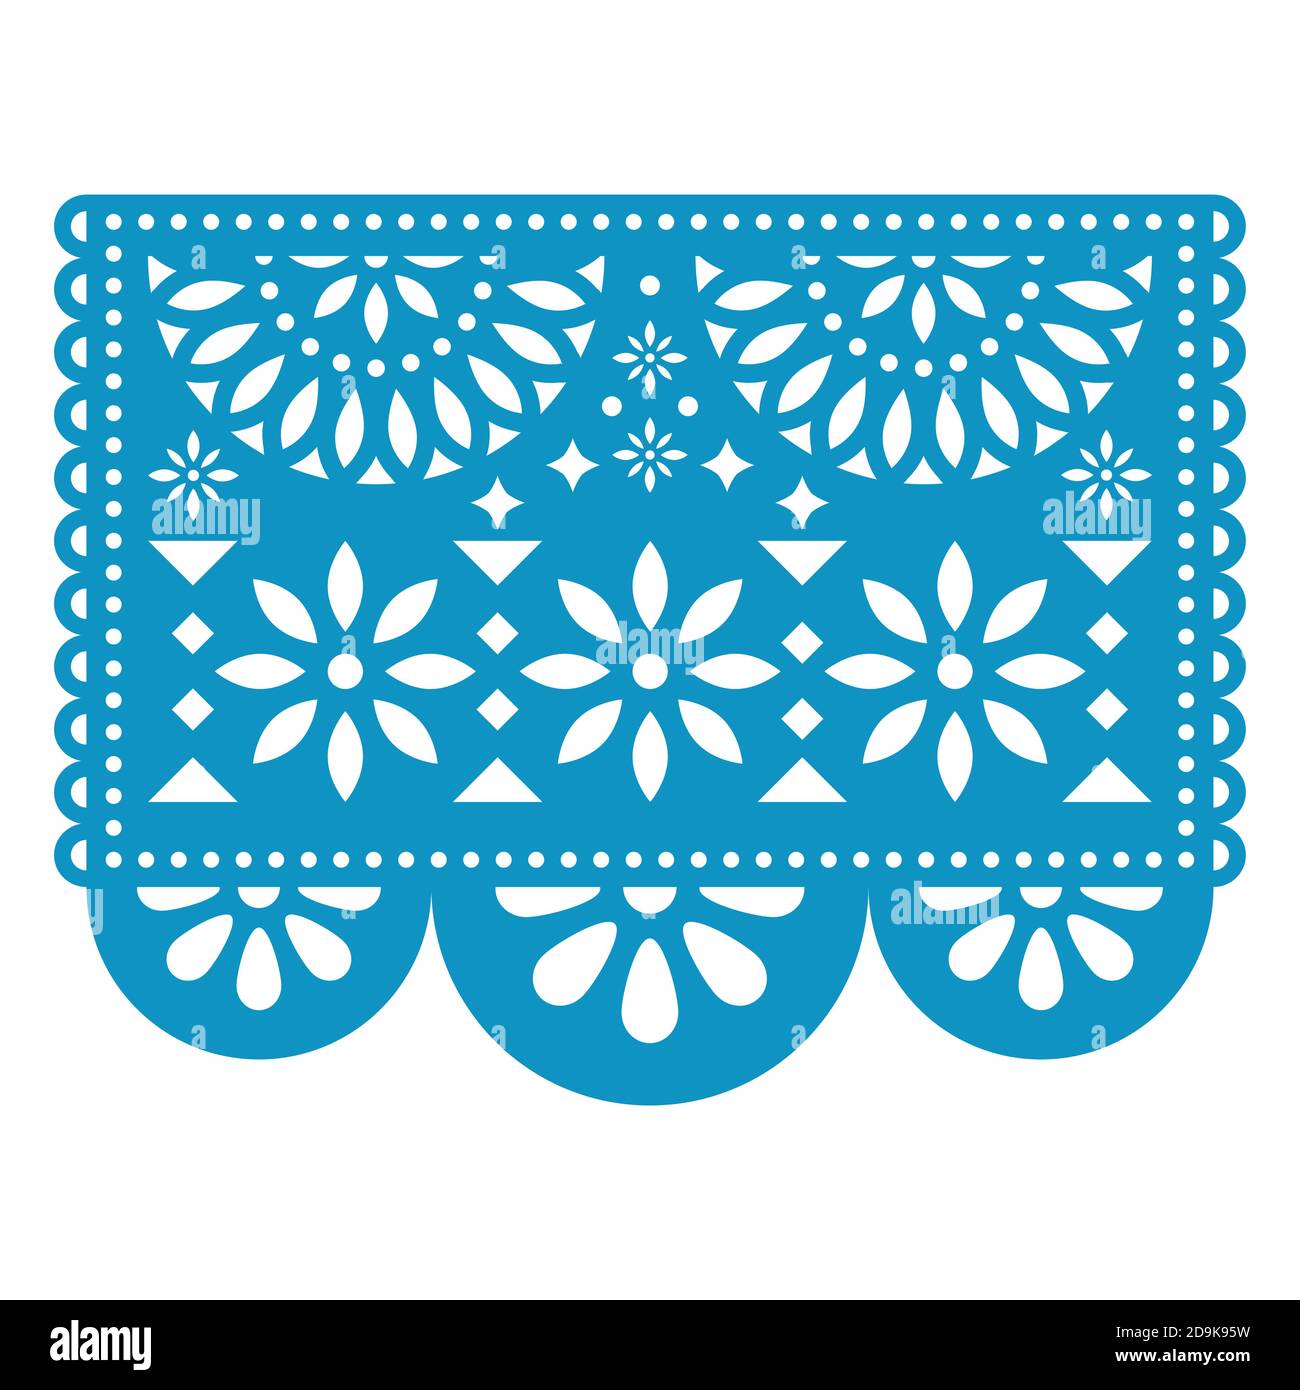 Papel Picado vector floral design with flowers, traditional Mexican party decorations Stock Vector